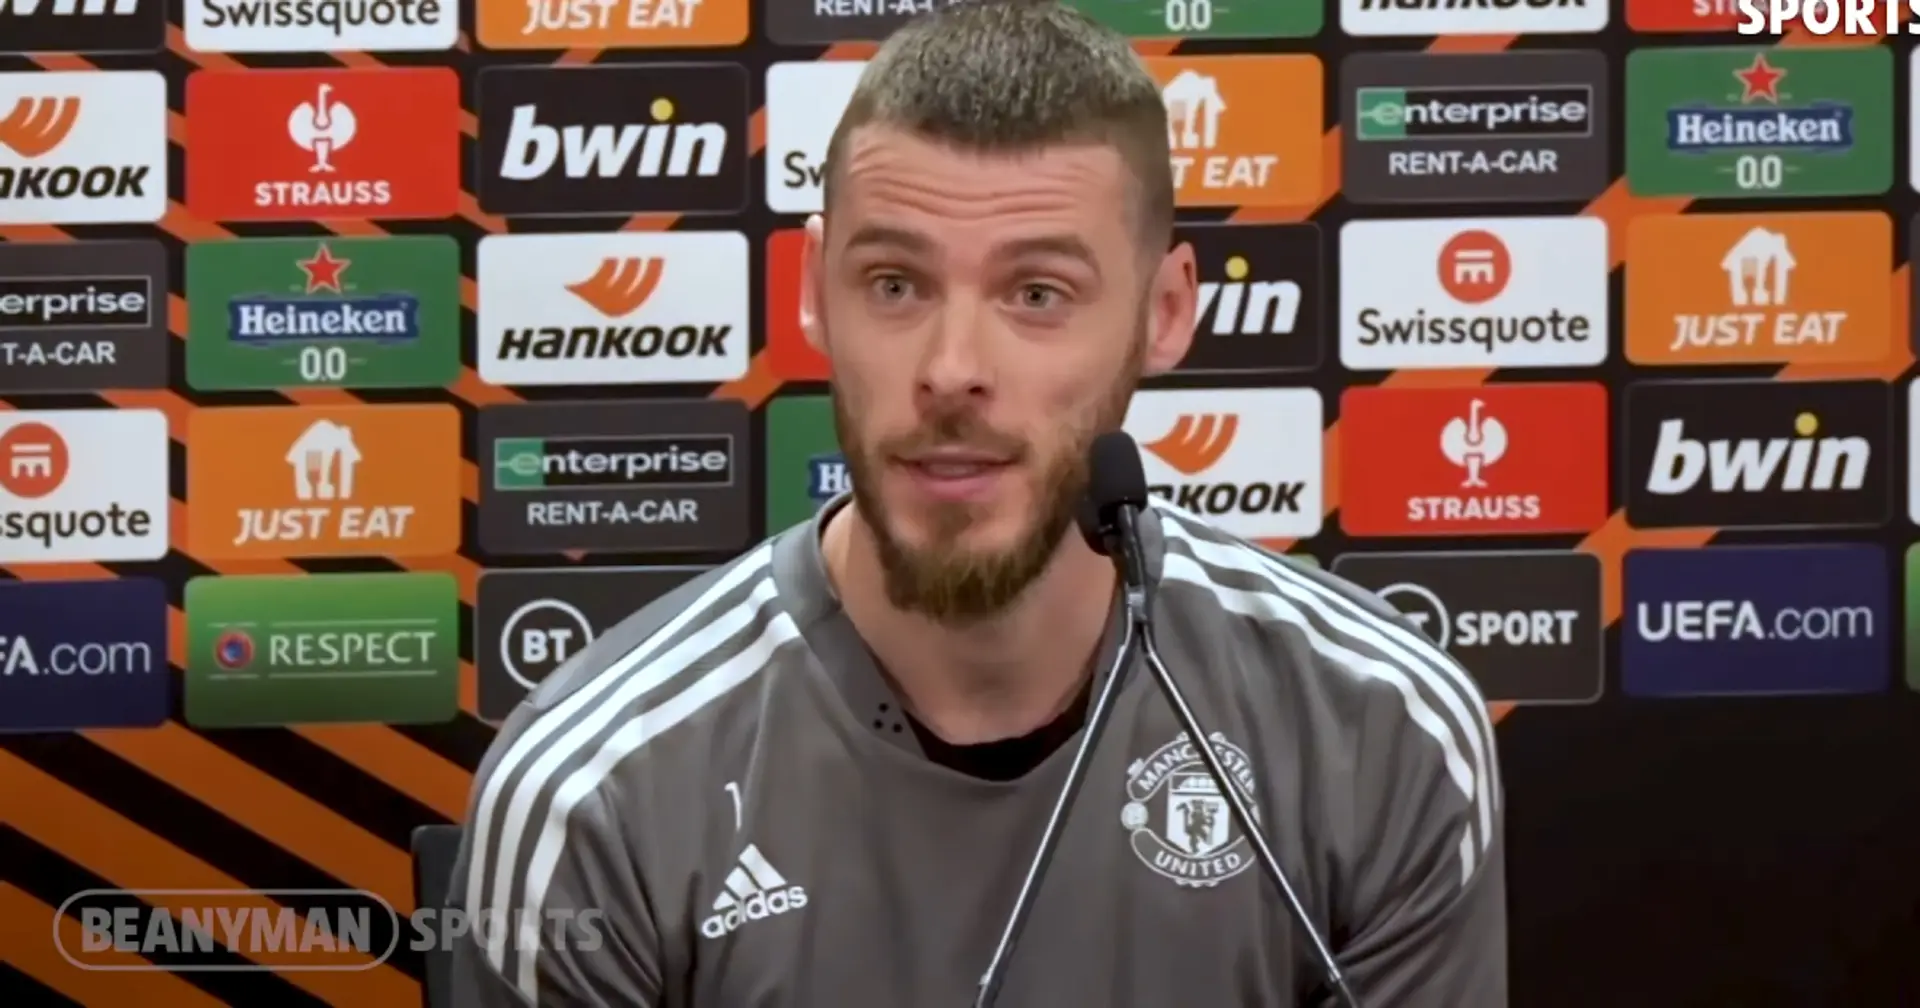 'No time to think about': David De Gea refuses to speculate on his Man United future